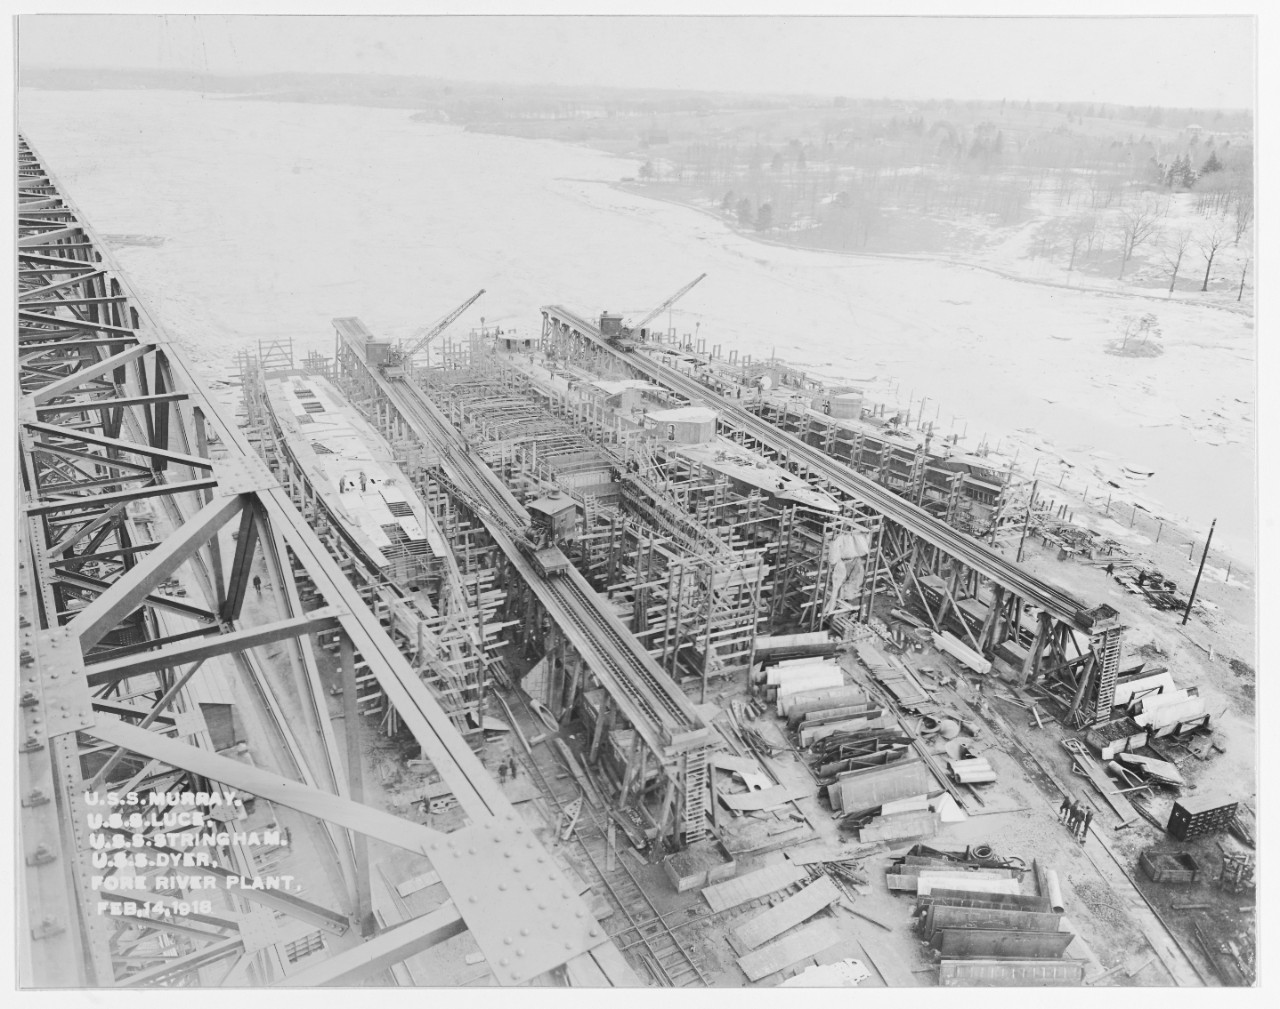 Photo #: NH 43020  Fore River Shipbuilding Company, Quincy, Massachusetts